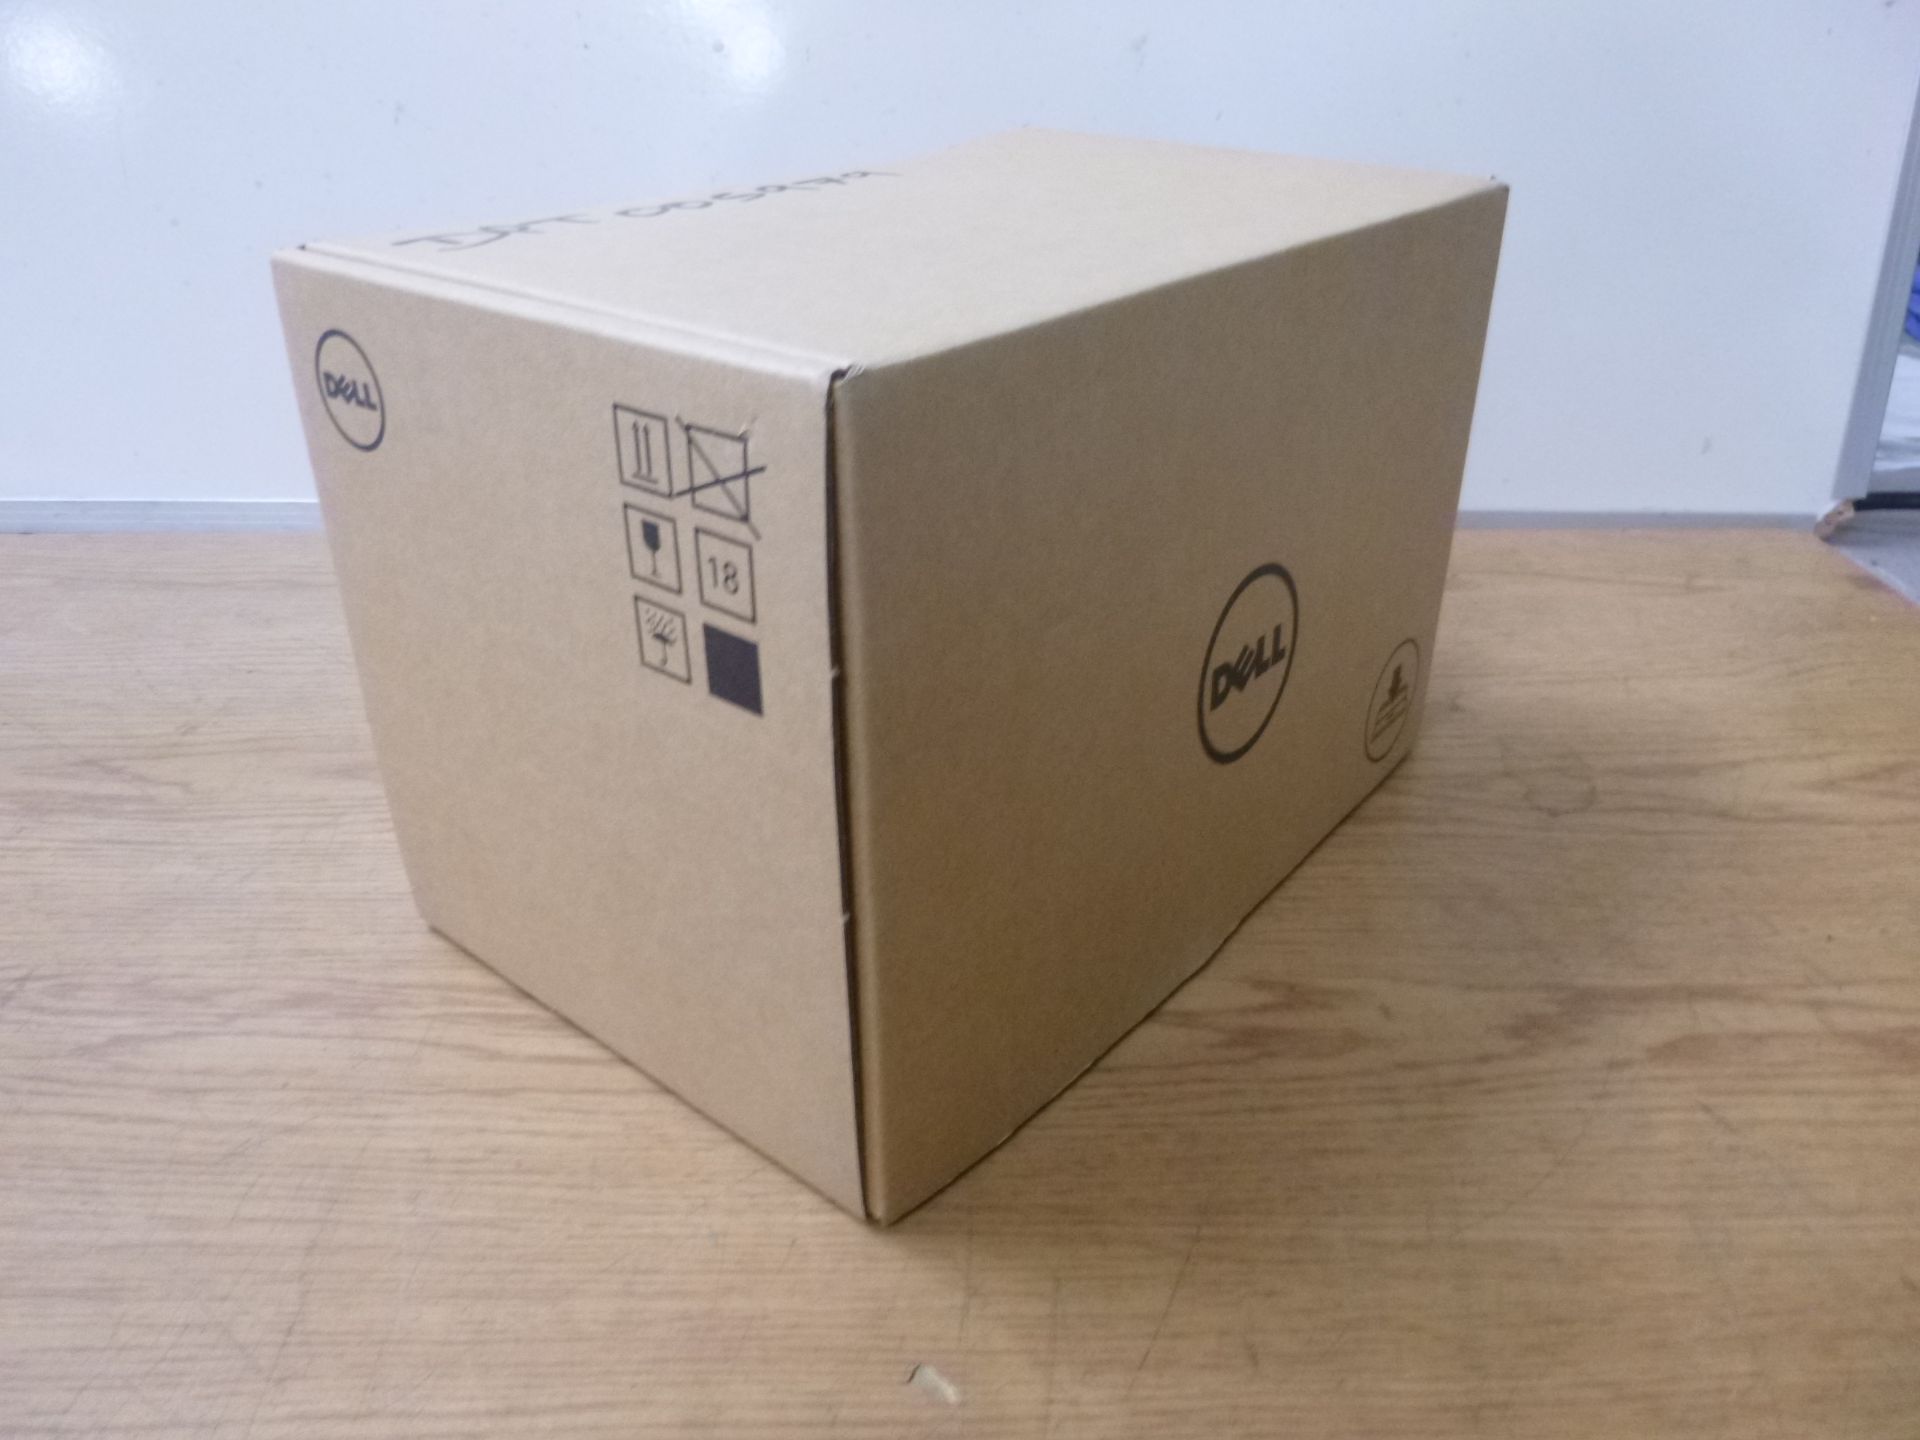 BOXED UNUSED Dell Venue 11 Pro Tablet Docking Station 5130 / 7130 / 7139 / 7140 / 7350. WITH PSU. - Image 3 of 3